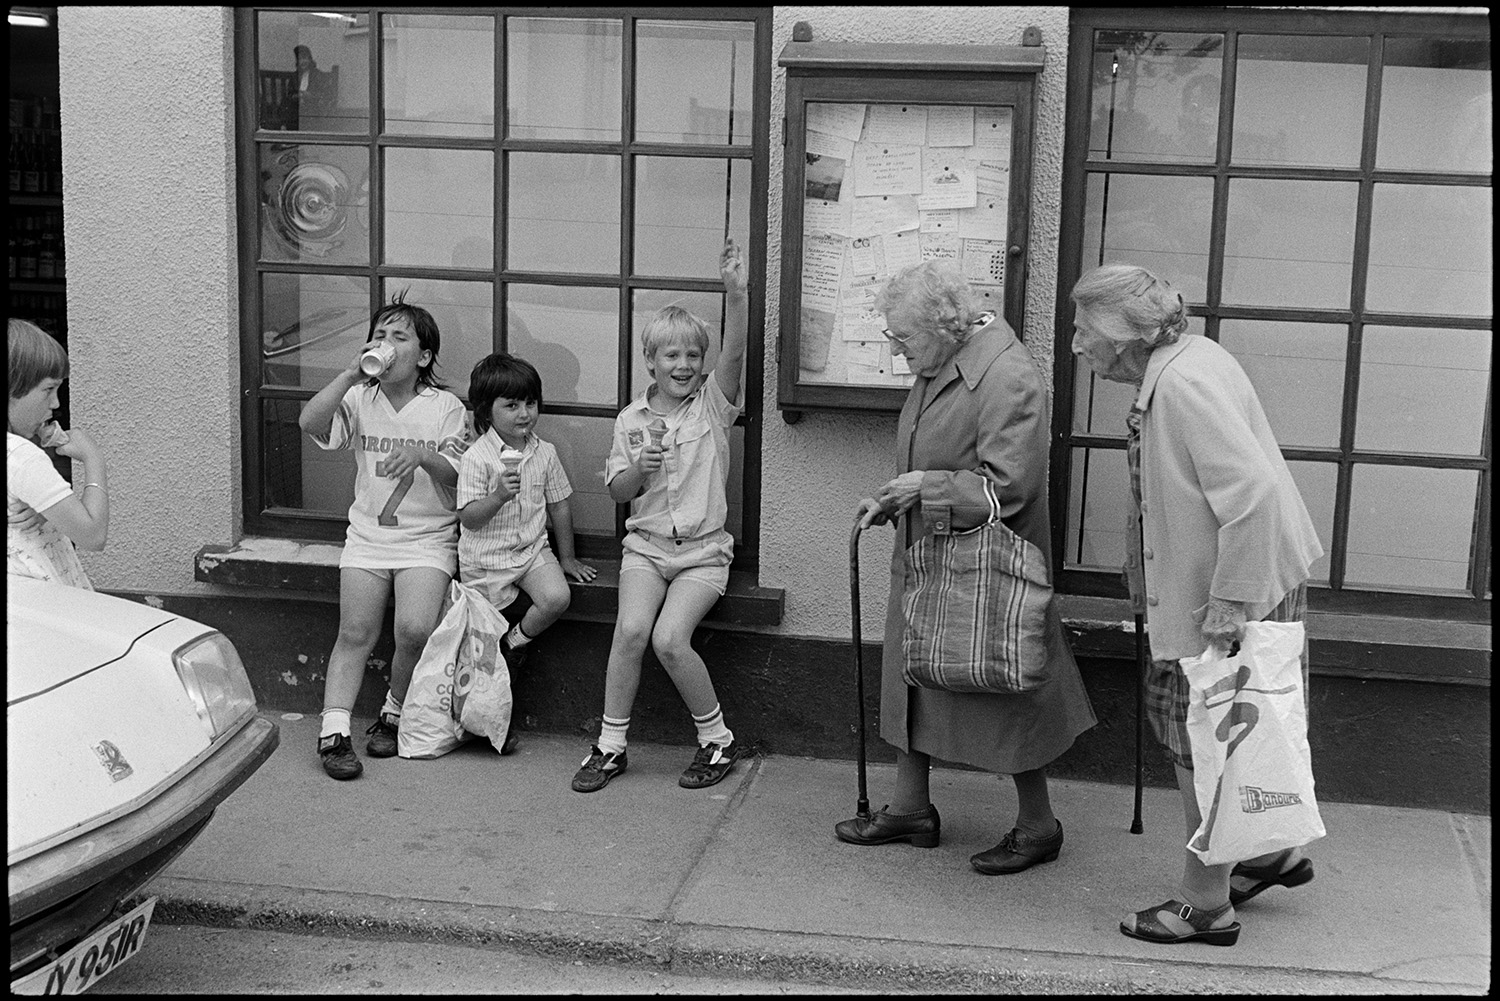 Street scenes with people and cars.
[Children sitting on a shop windowsill in a street in Chulmleigh with two women with walking sticks walking by. A notice board is on the wall in the background.]